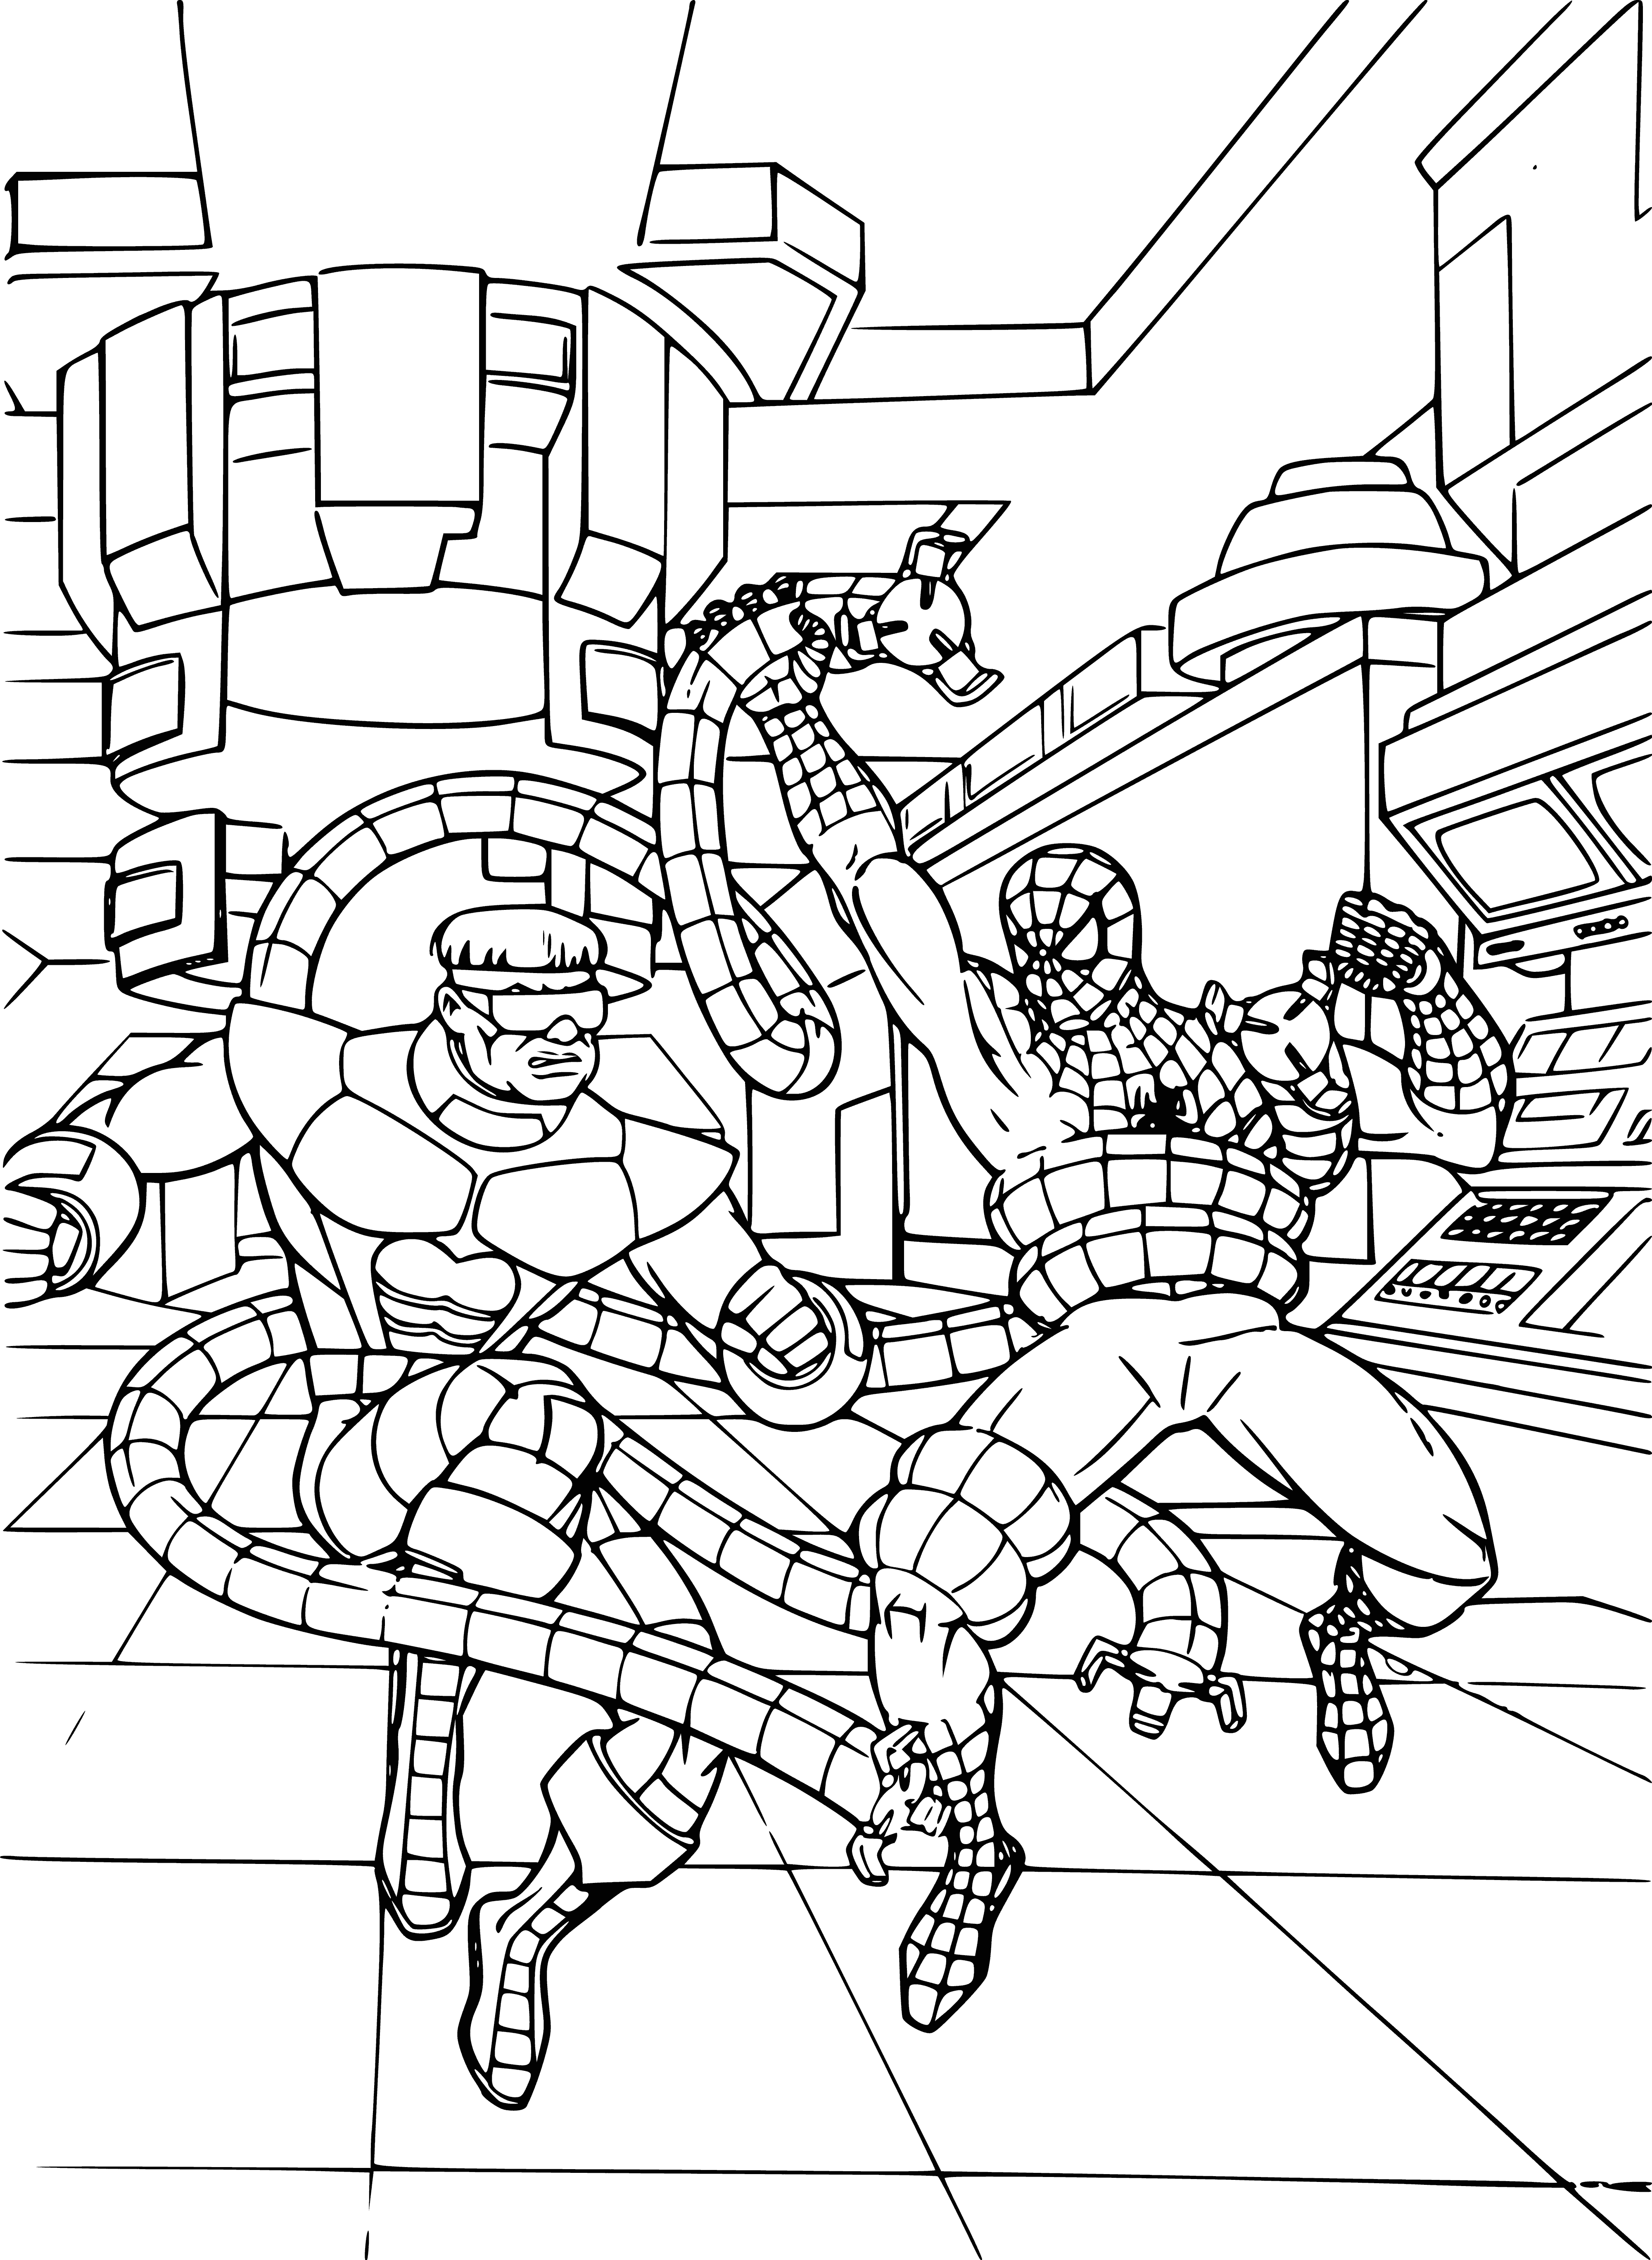 coloring page: SpiderMan dodging Doctor Octopus' metal arms & kicking him in epic battle.